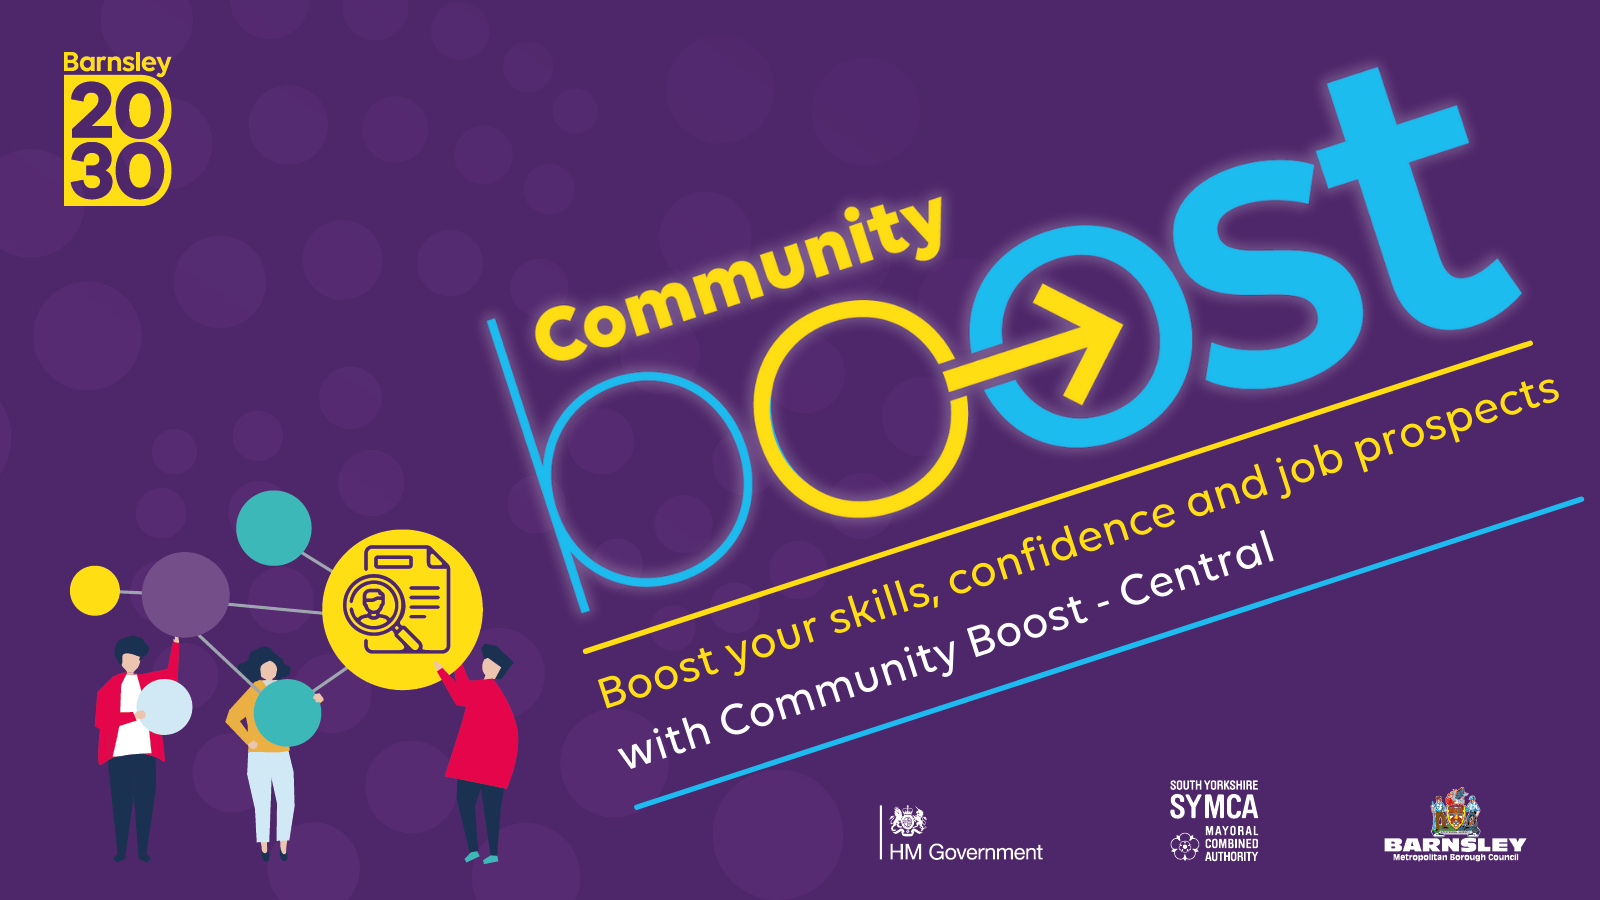 Community Boost. Boost your skills, confidence and job prospects with Community Boost - Central